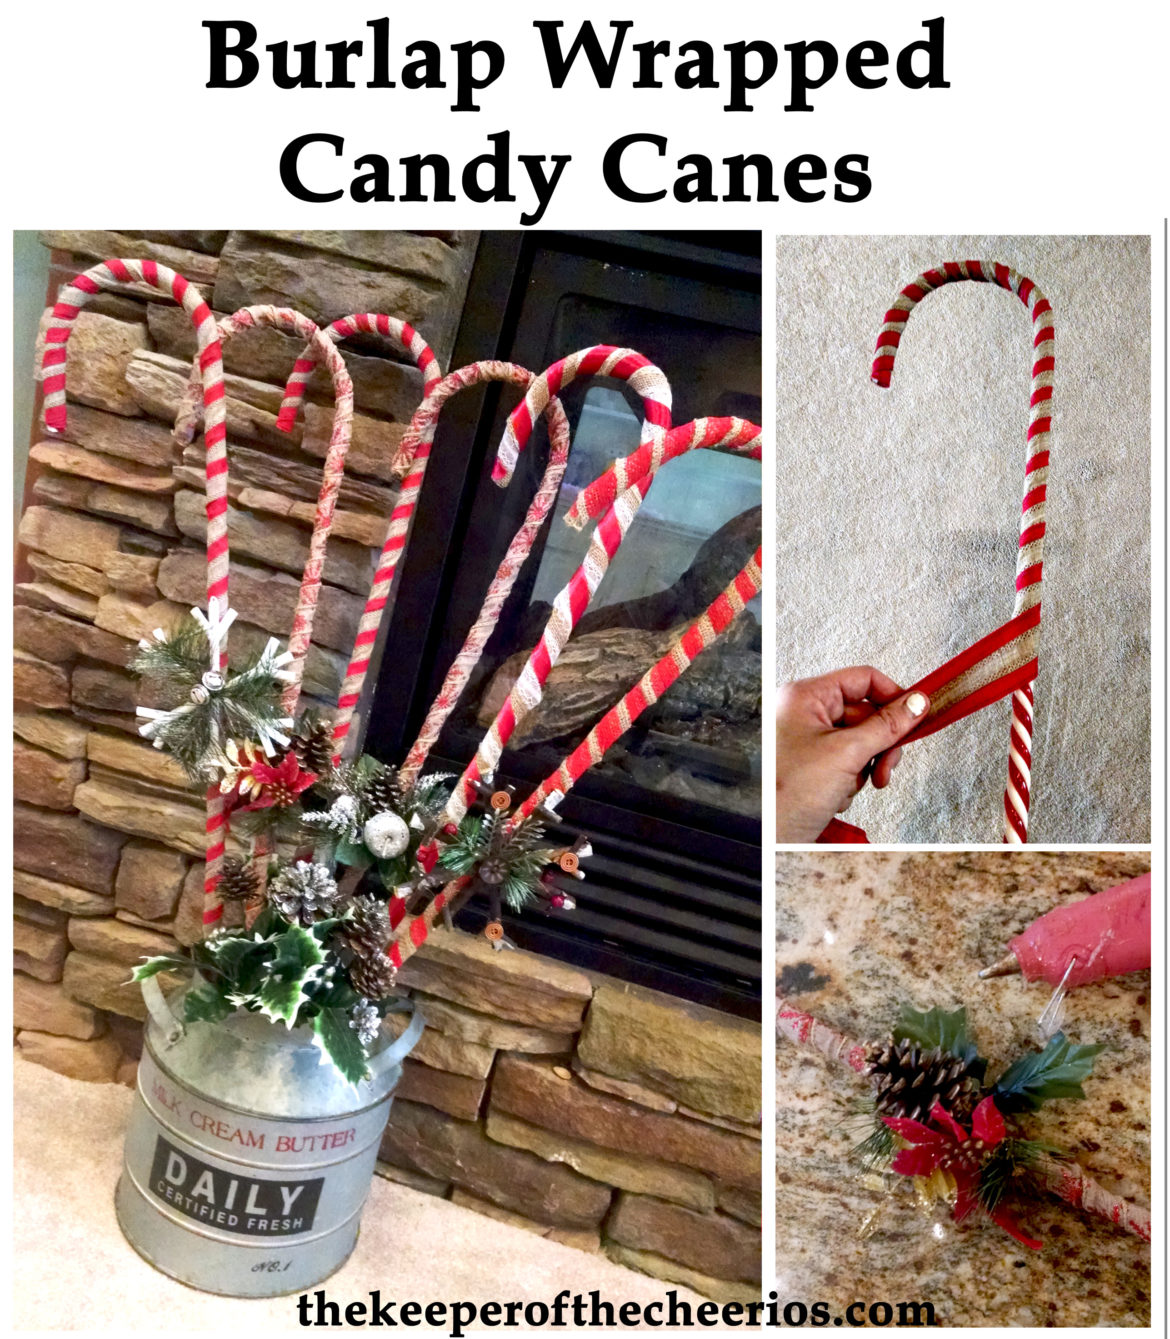 burlap-wrapped-candy-canes